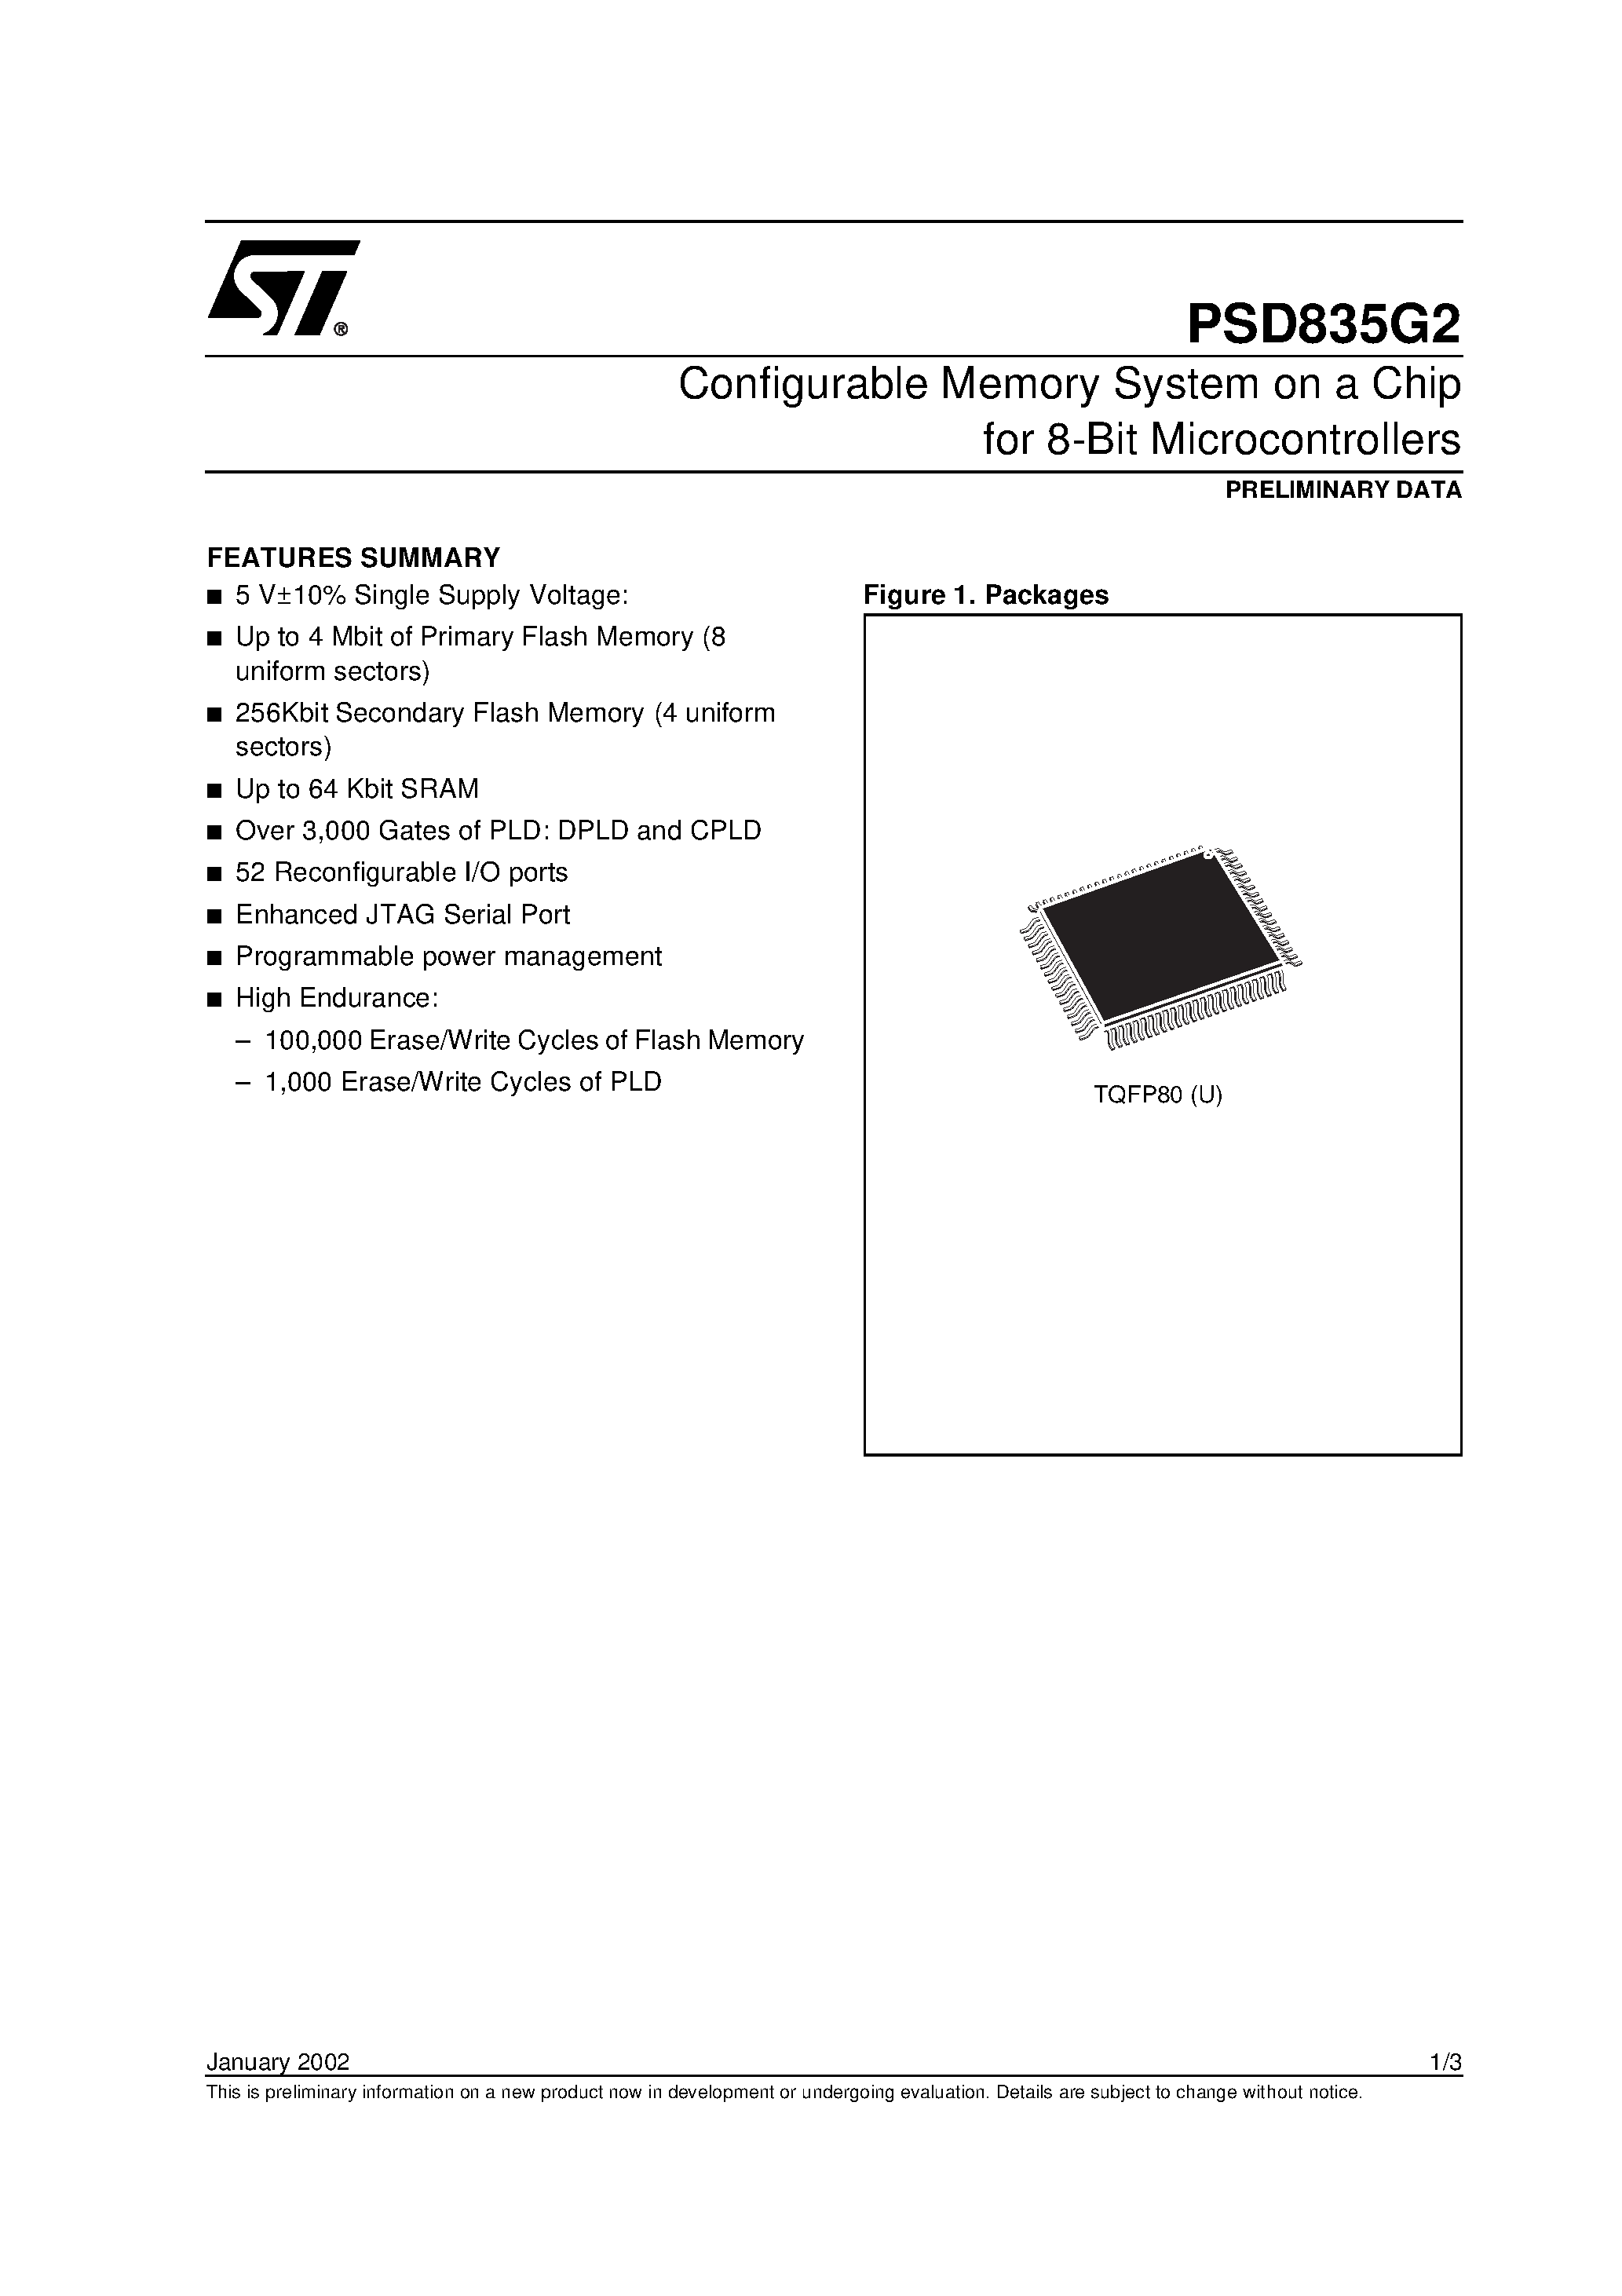 Datasheet PSD835F2-A-20UI - Configurable Memory System on a Chip for 8-Bit Microcontrollers page 1